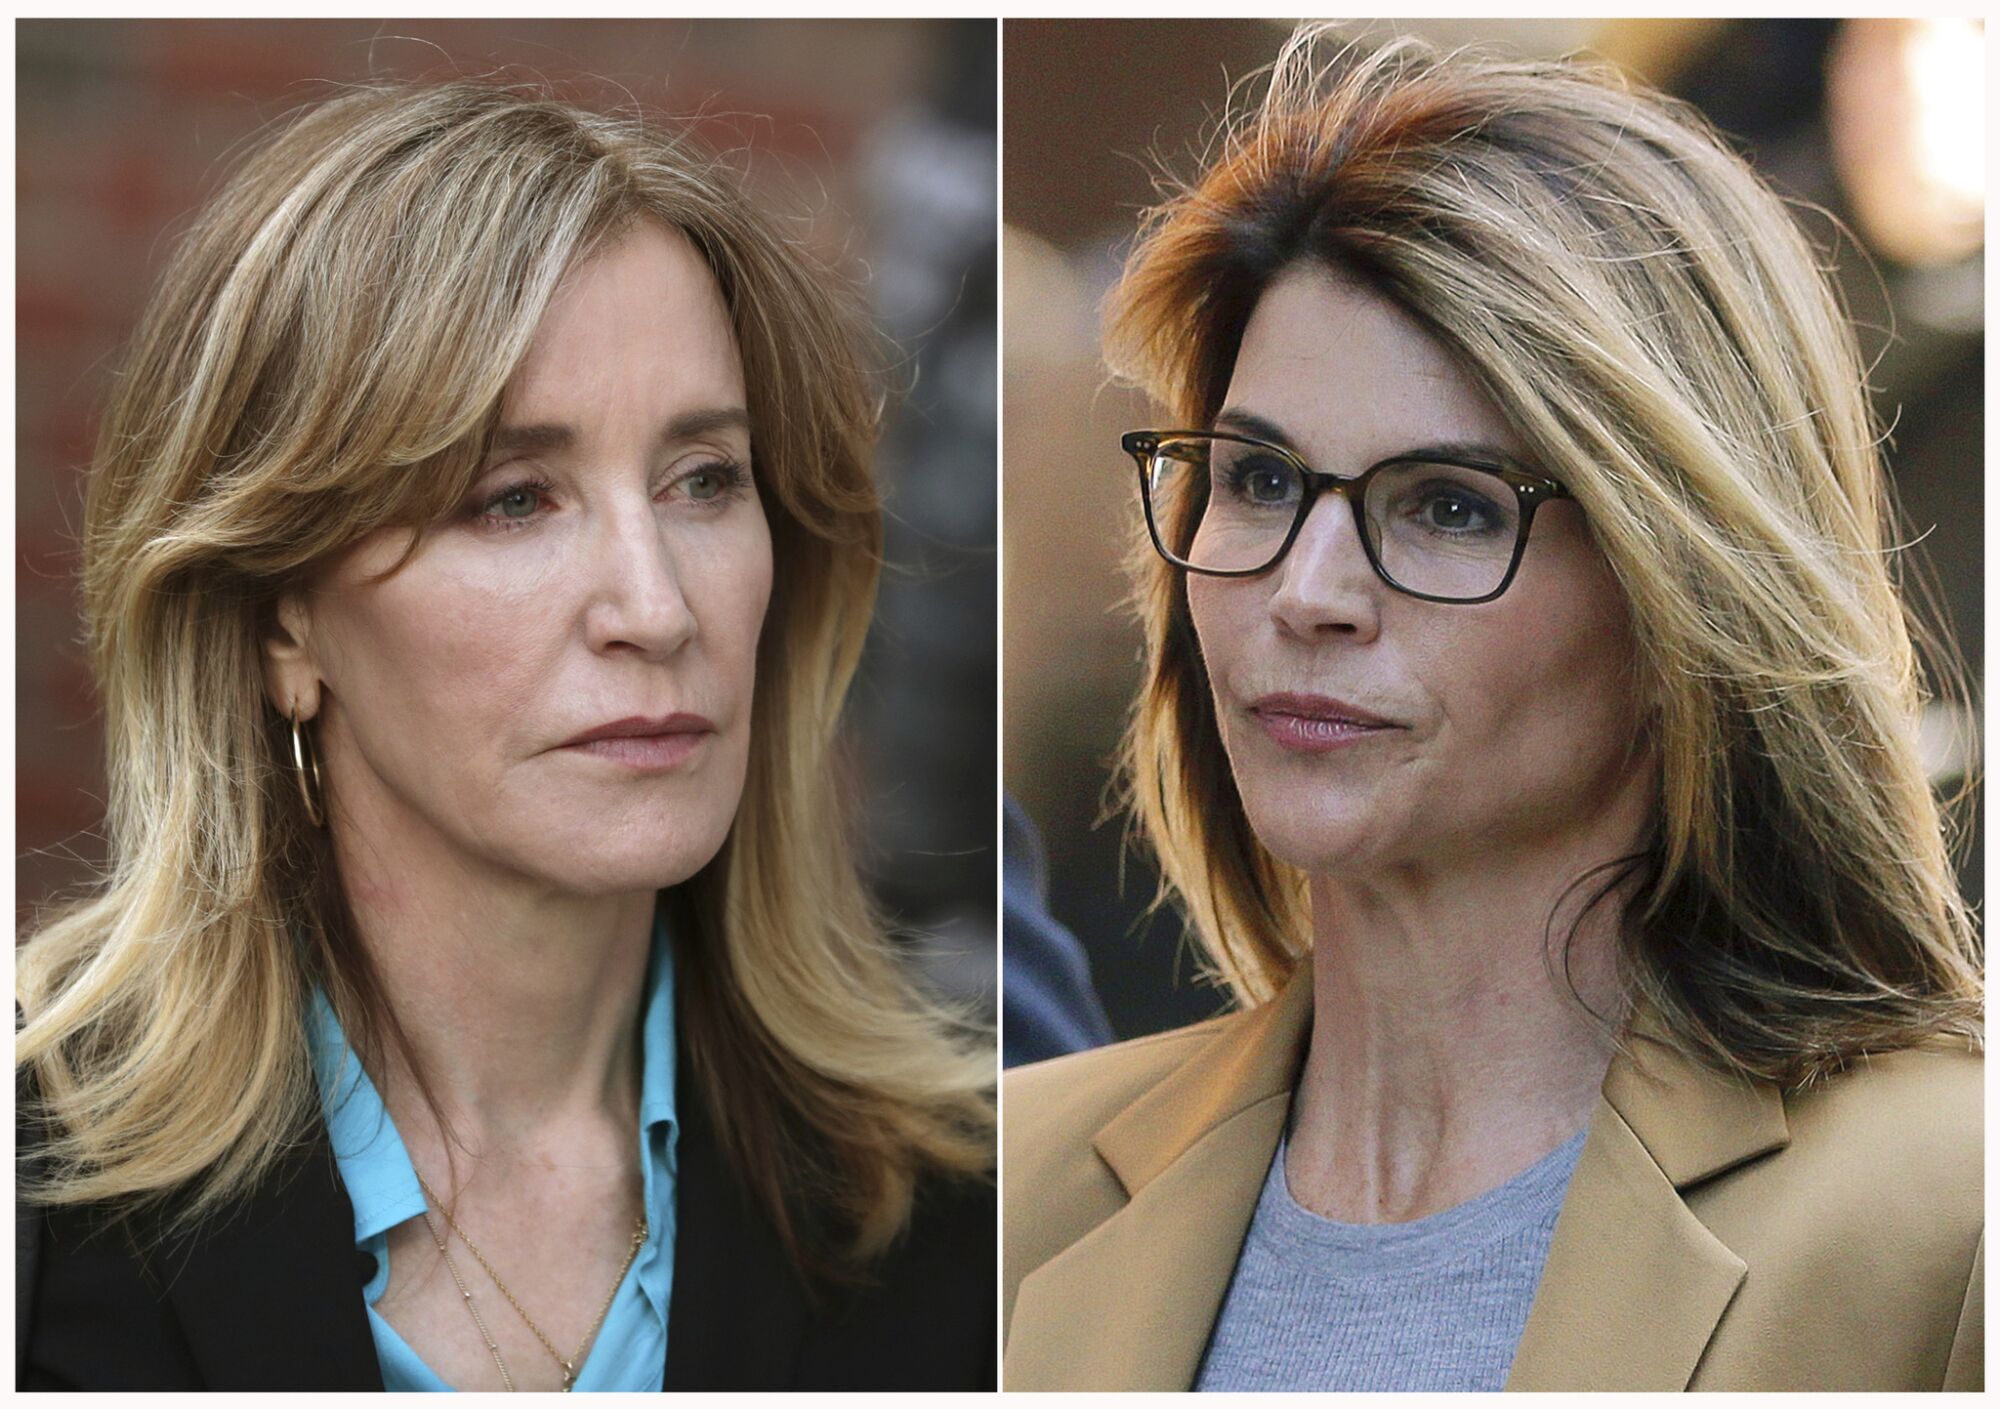 Felicity Huffman, left, and Lori Loughlin outside federal court in Boston on April 3.